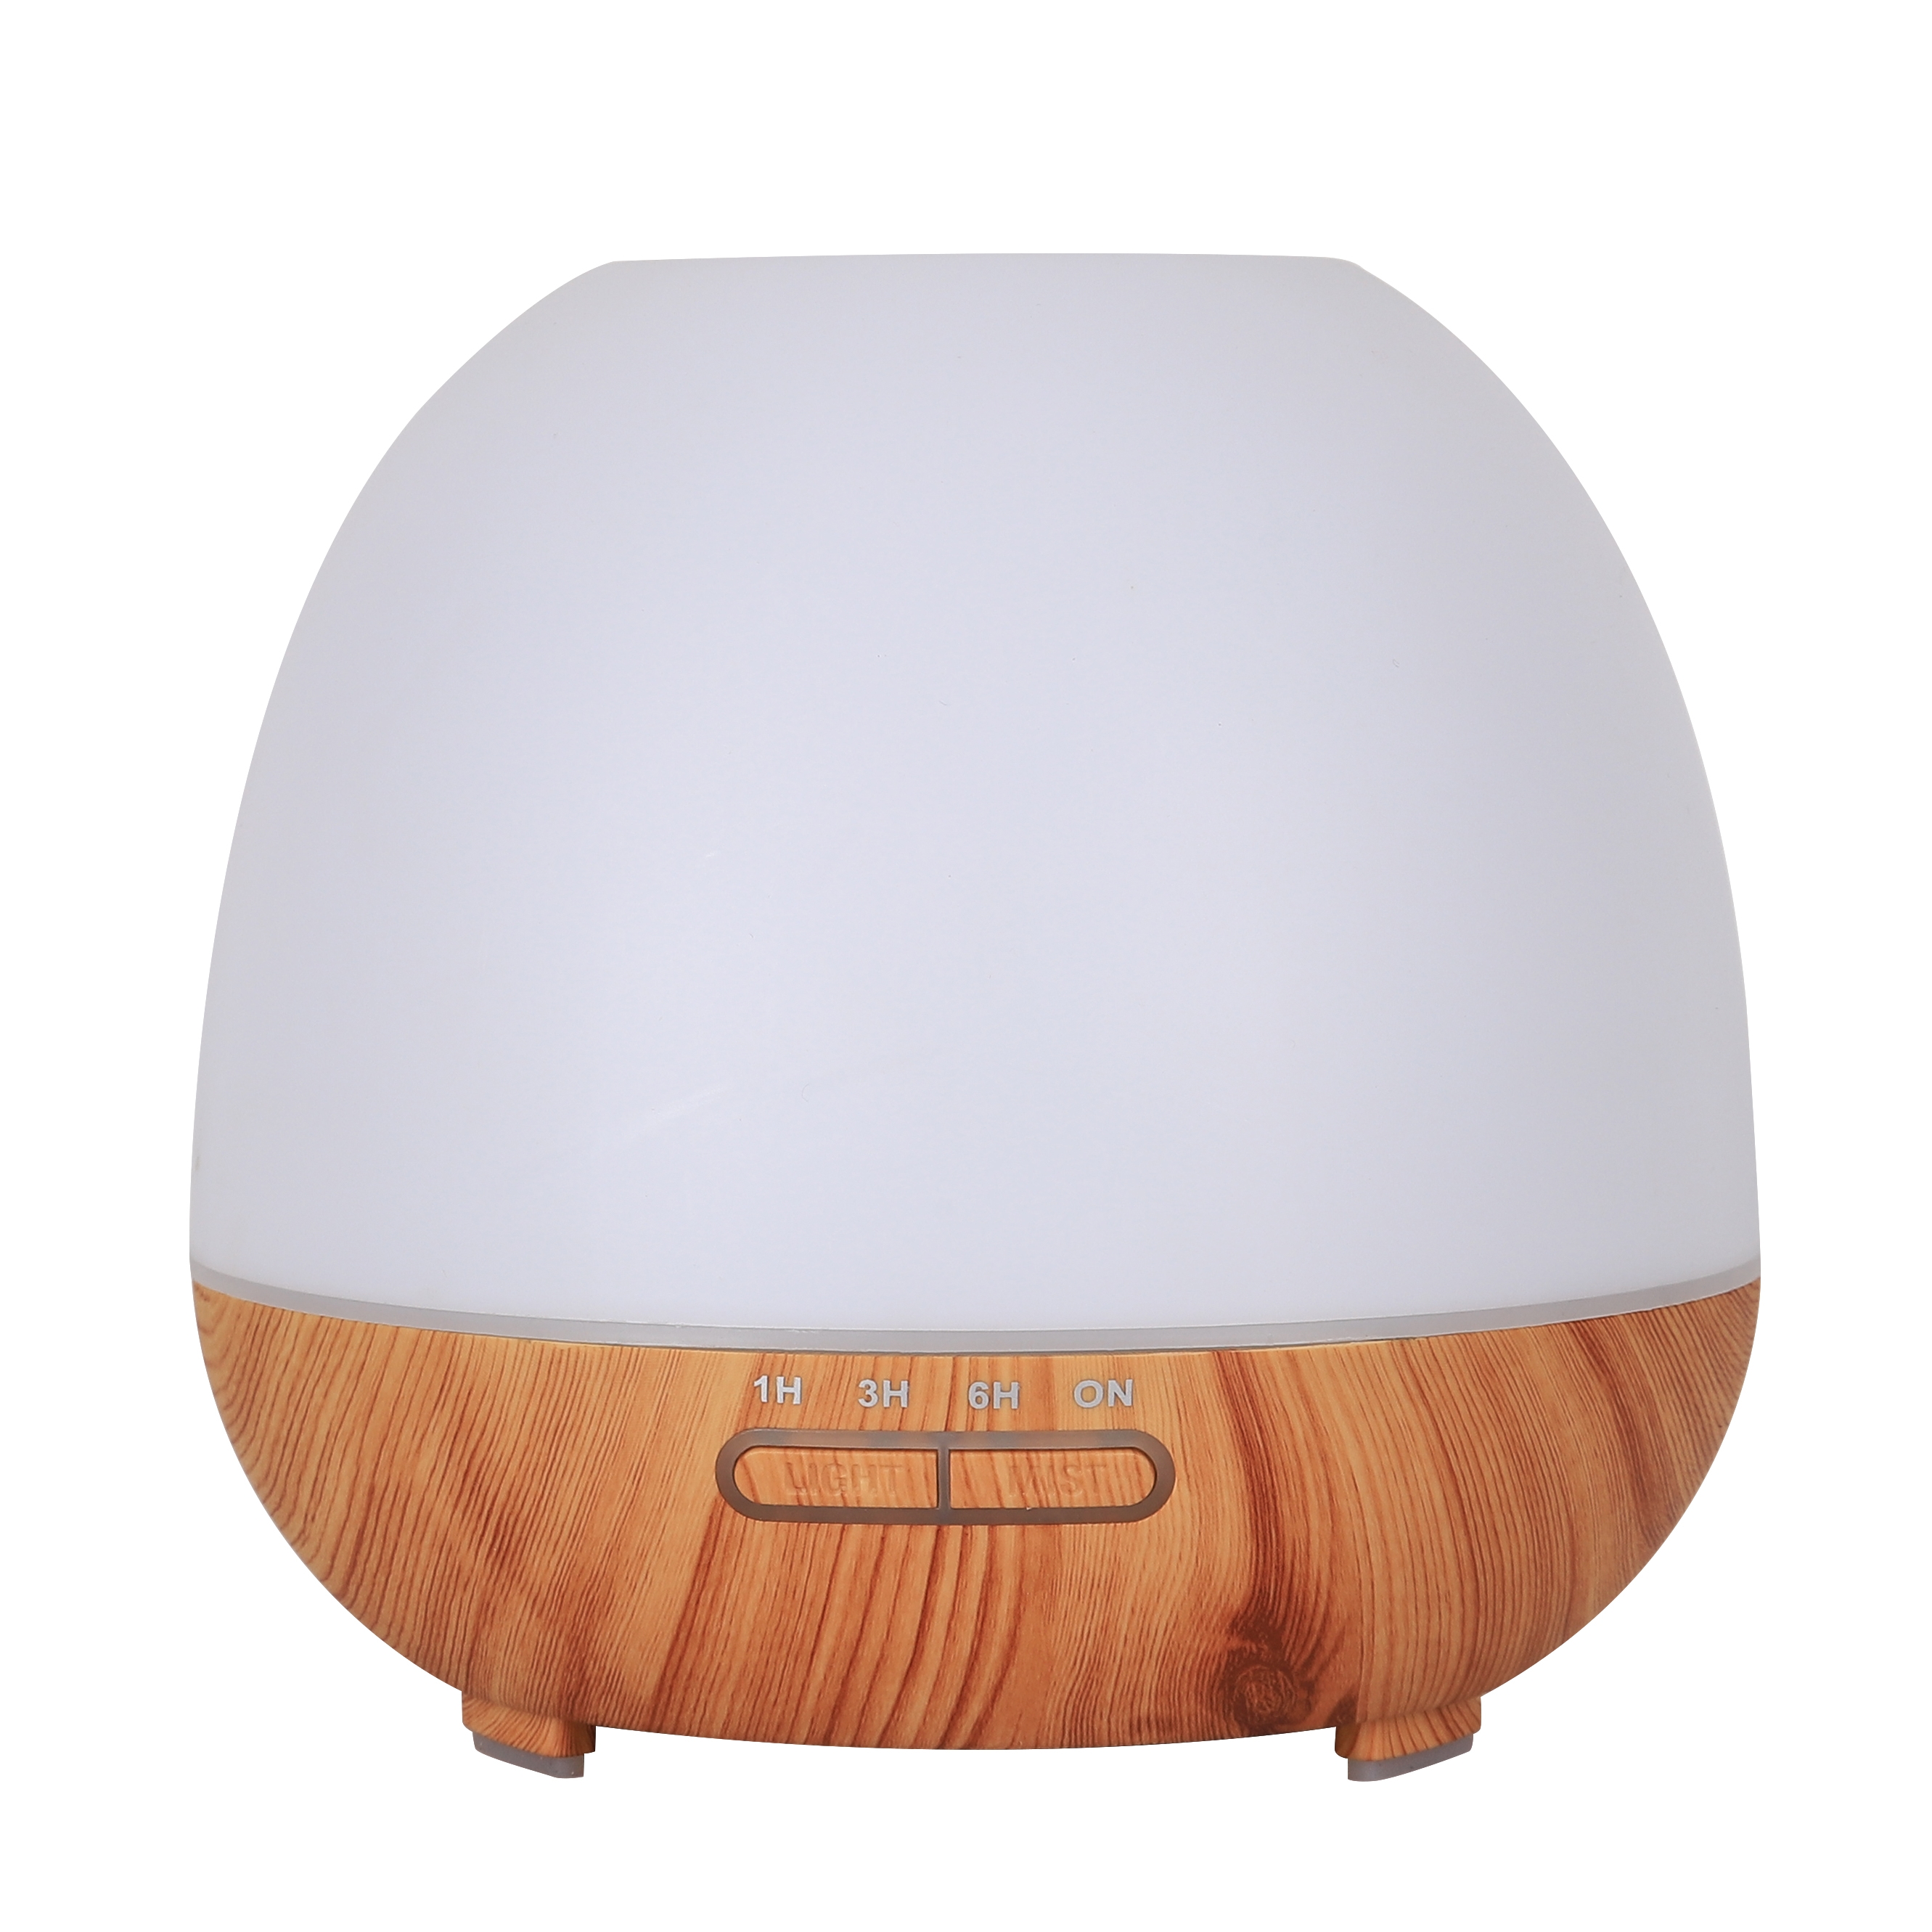 Best Price on China Portable Ultrasonic Electric Scent Air Humidifier Purifier Essential Oil Aroma wood Grain